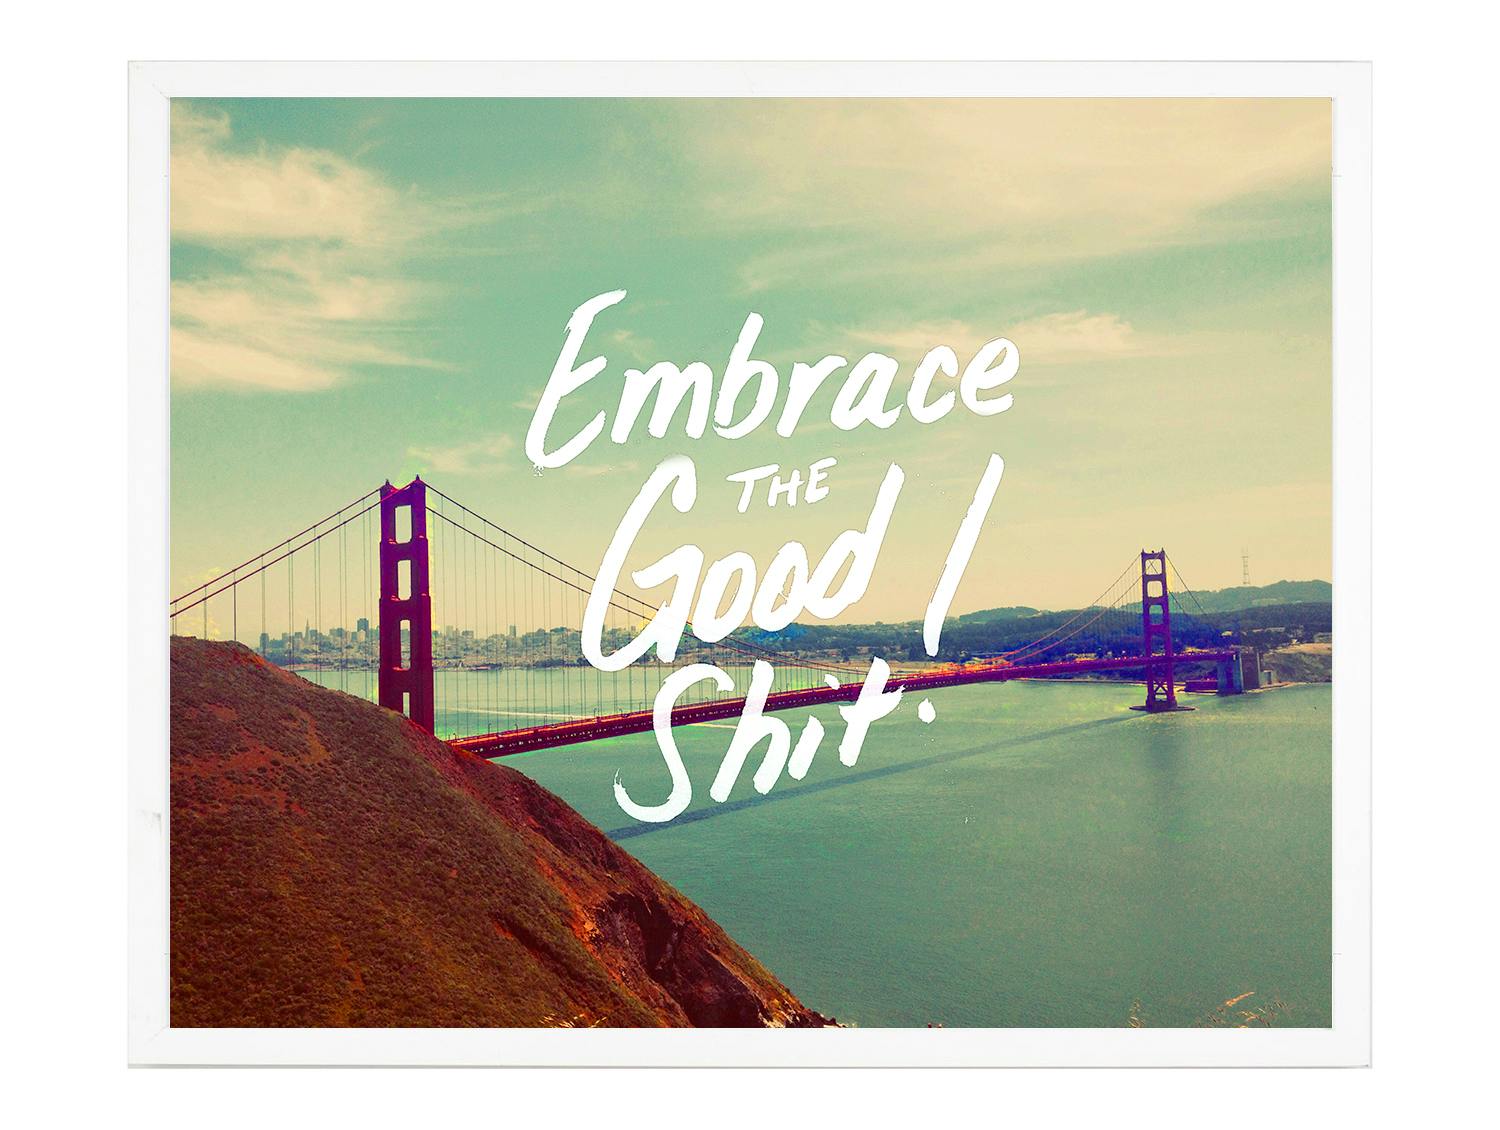 Embrace the good